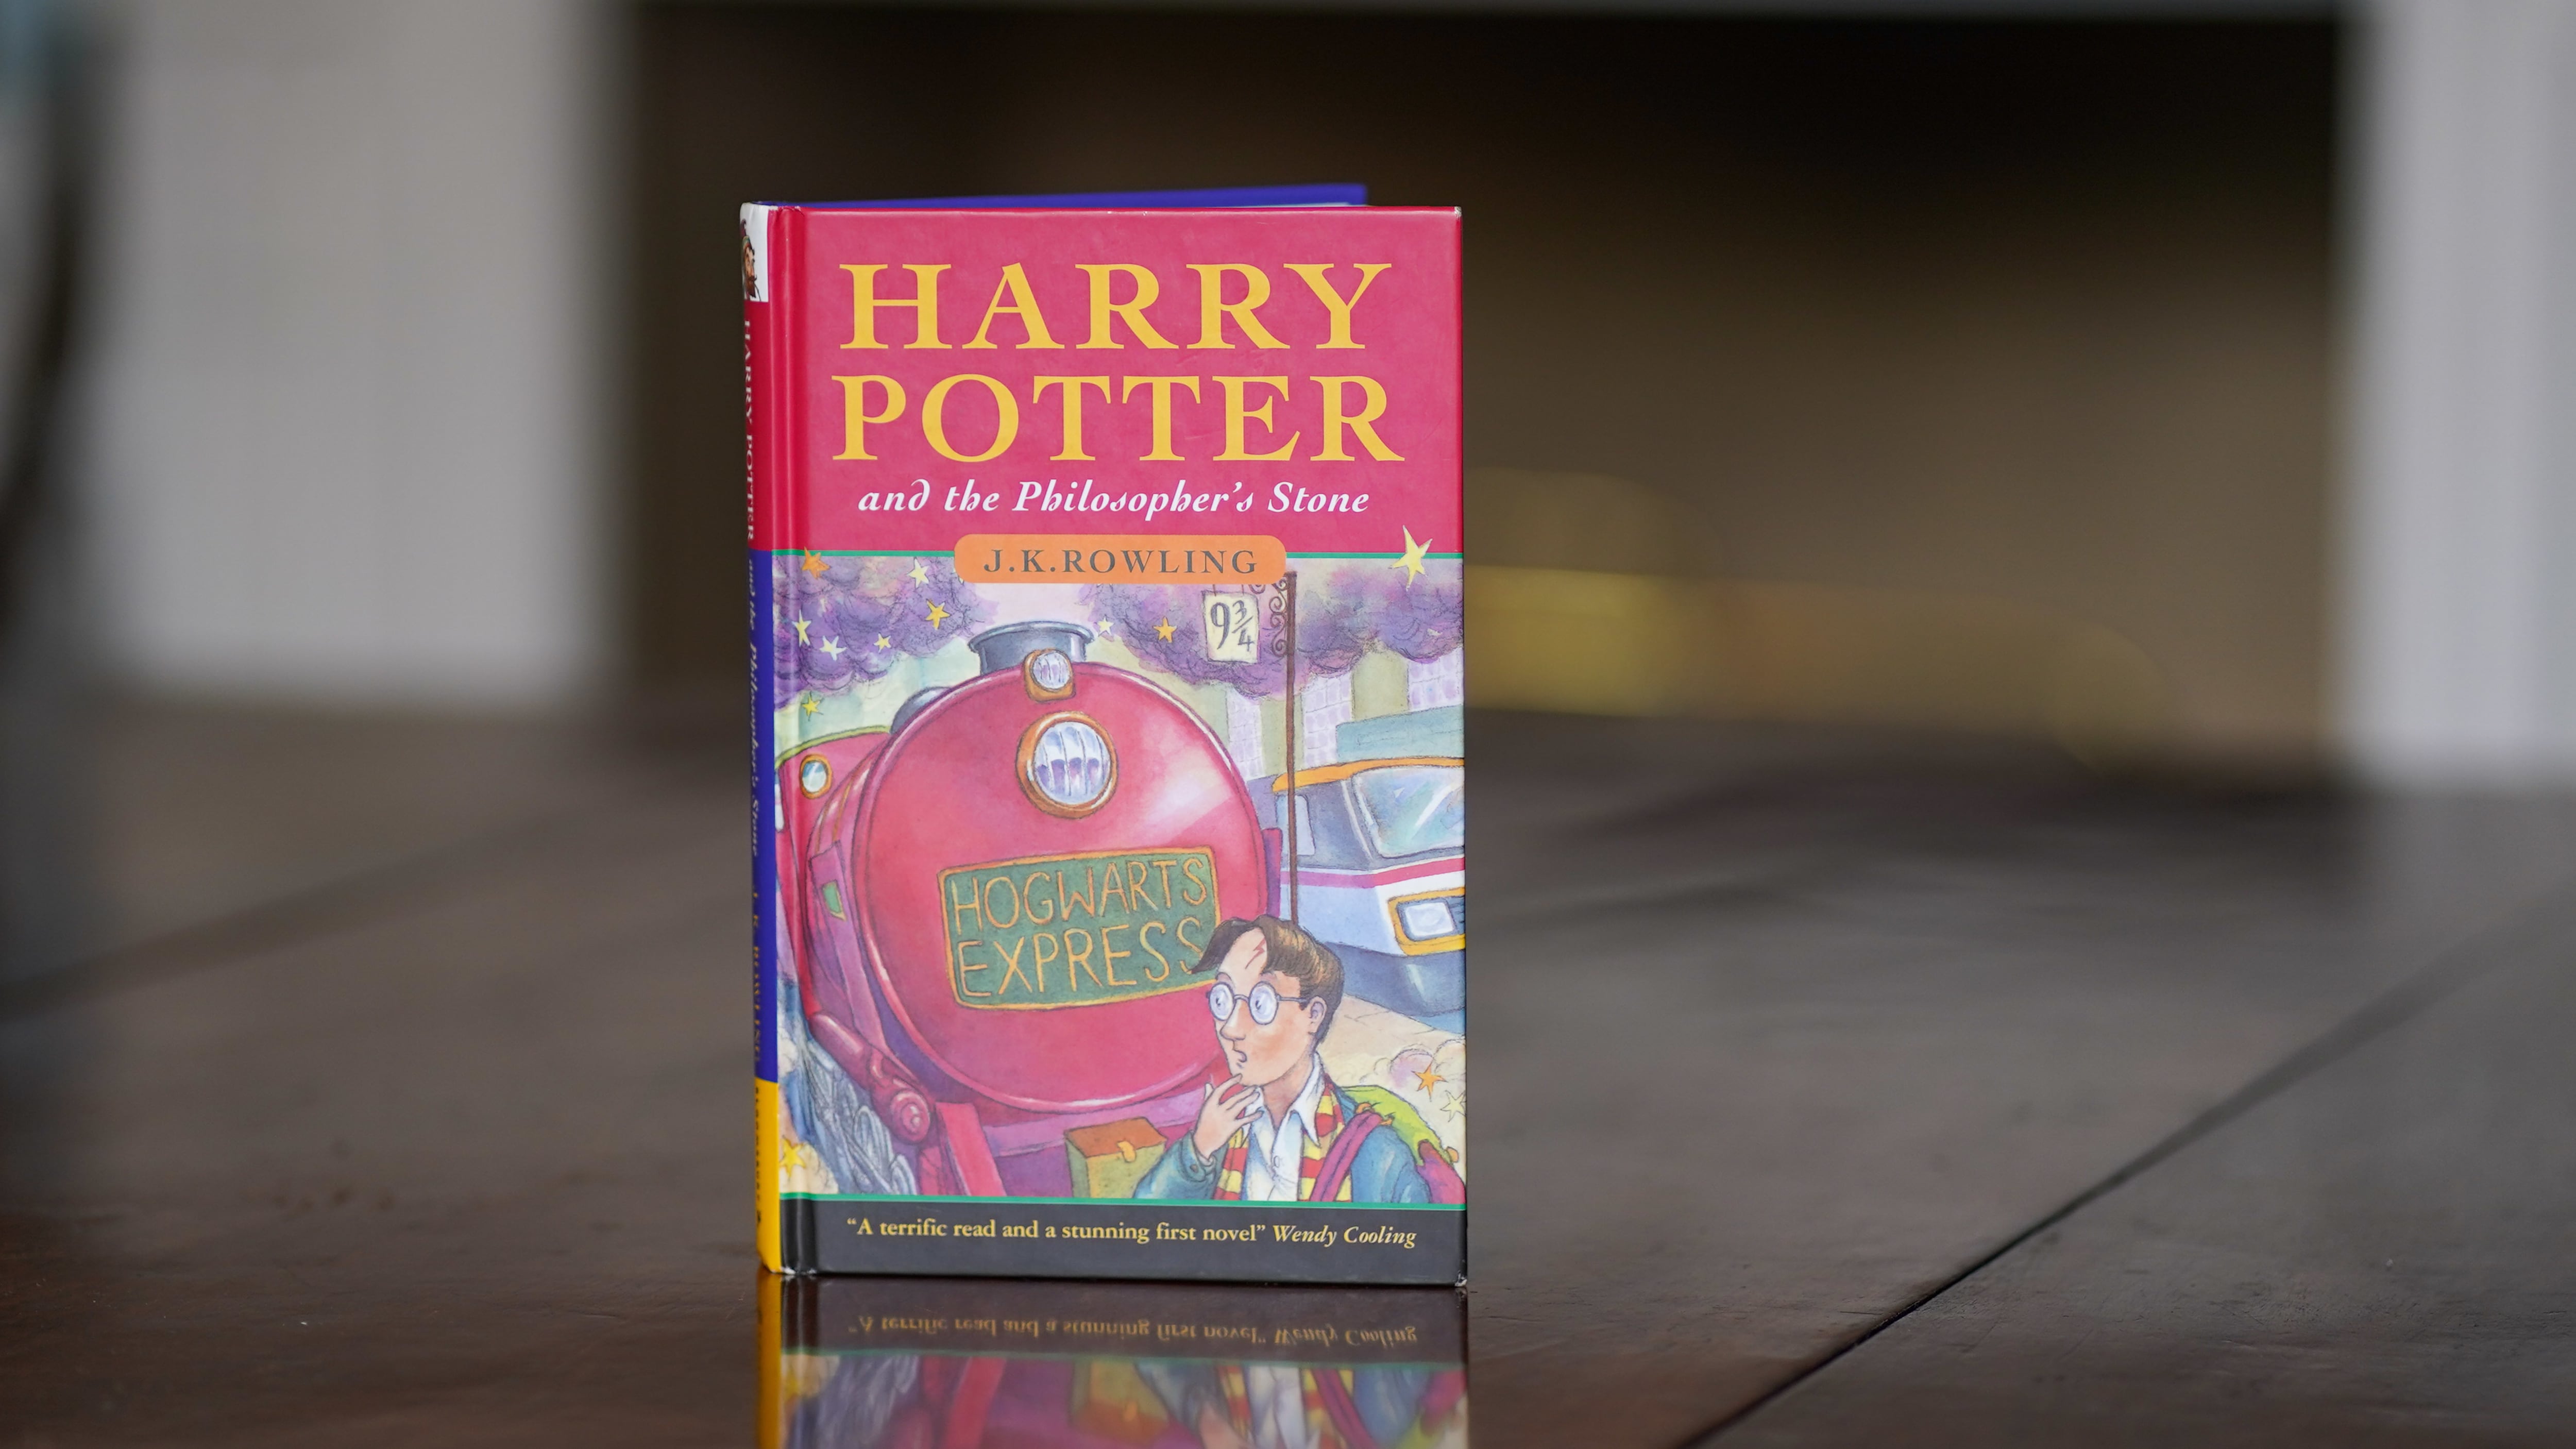 The edition of Harry Potter And The Philosopher’s Stone was one of only 500 printed